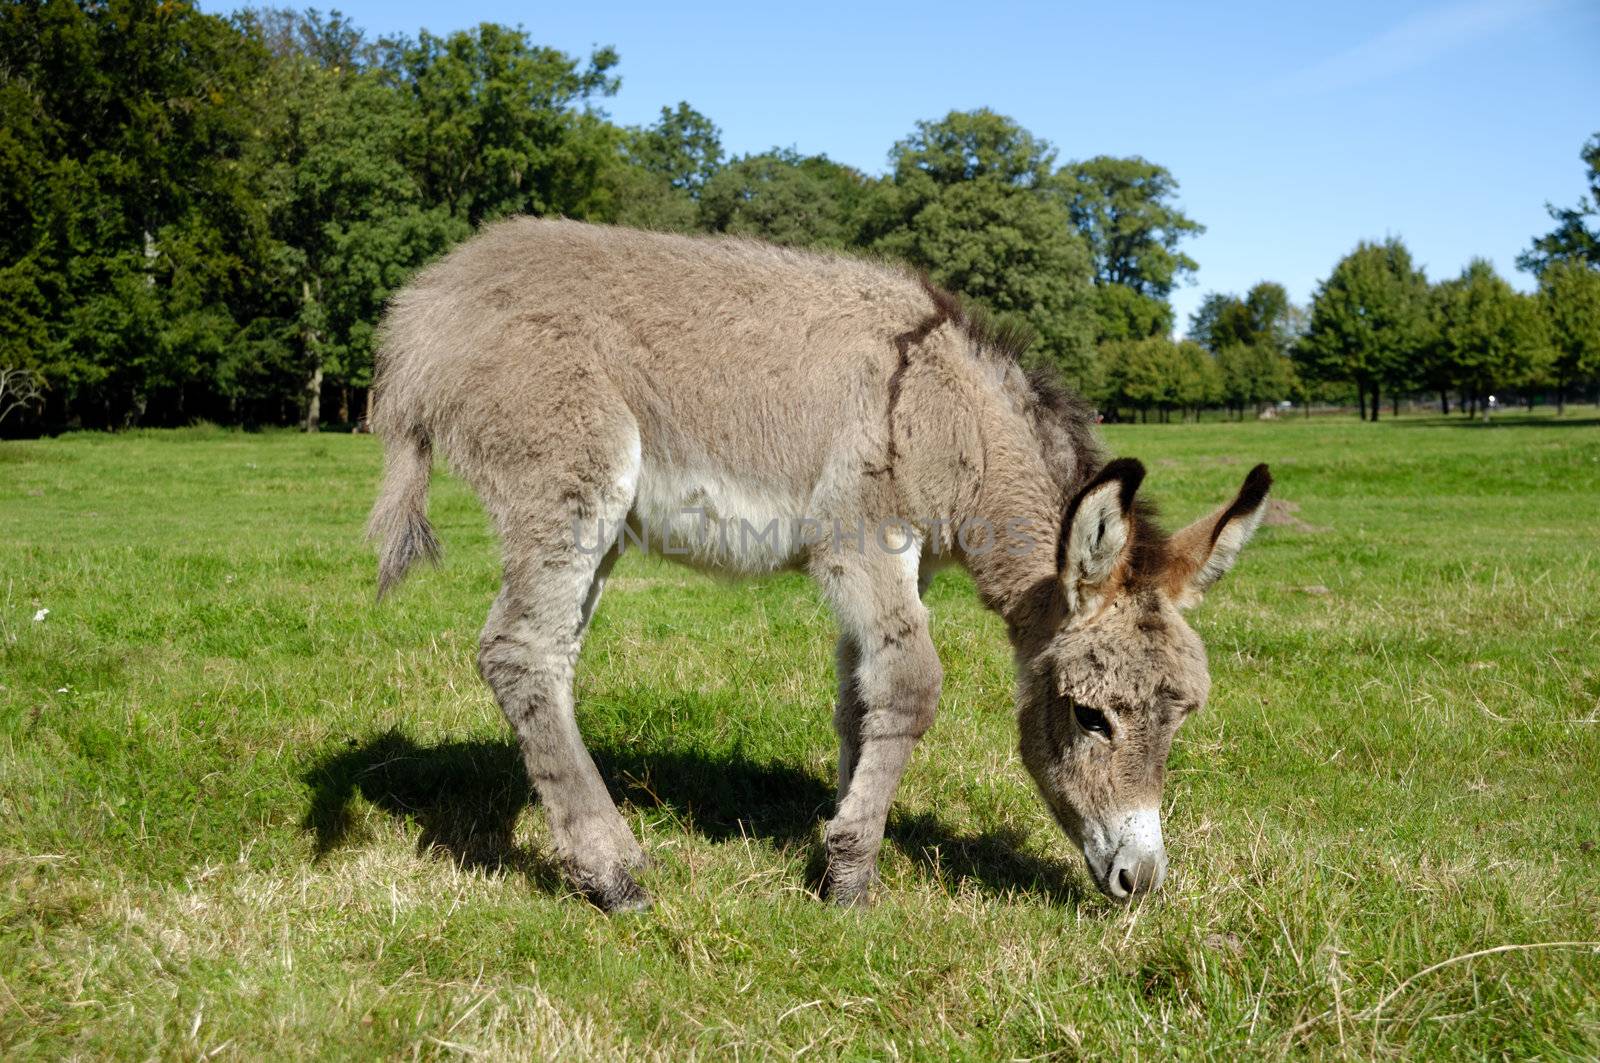 A sweet donkey foal is eating green grass
